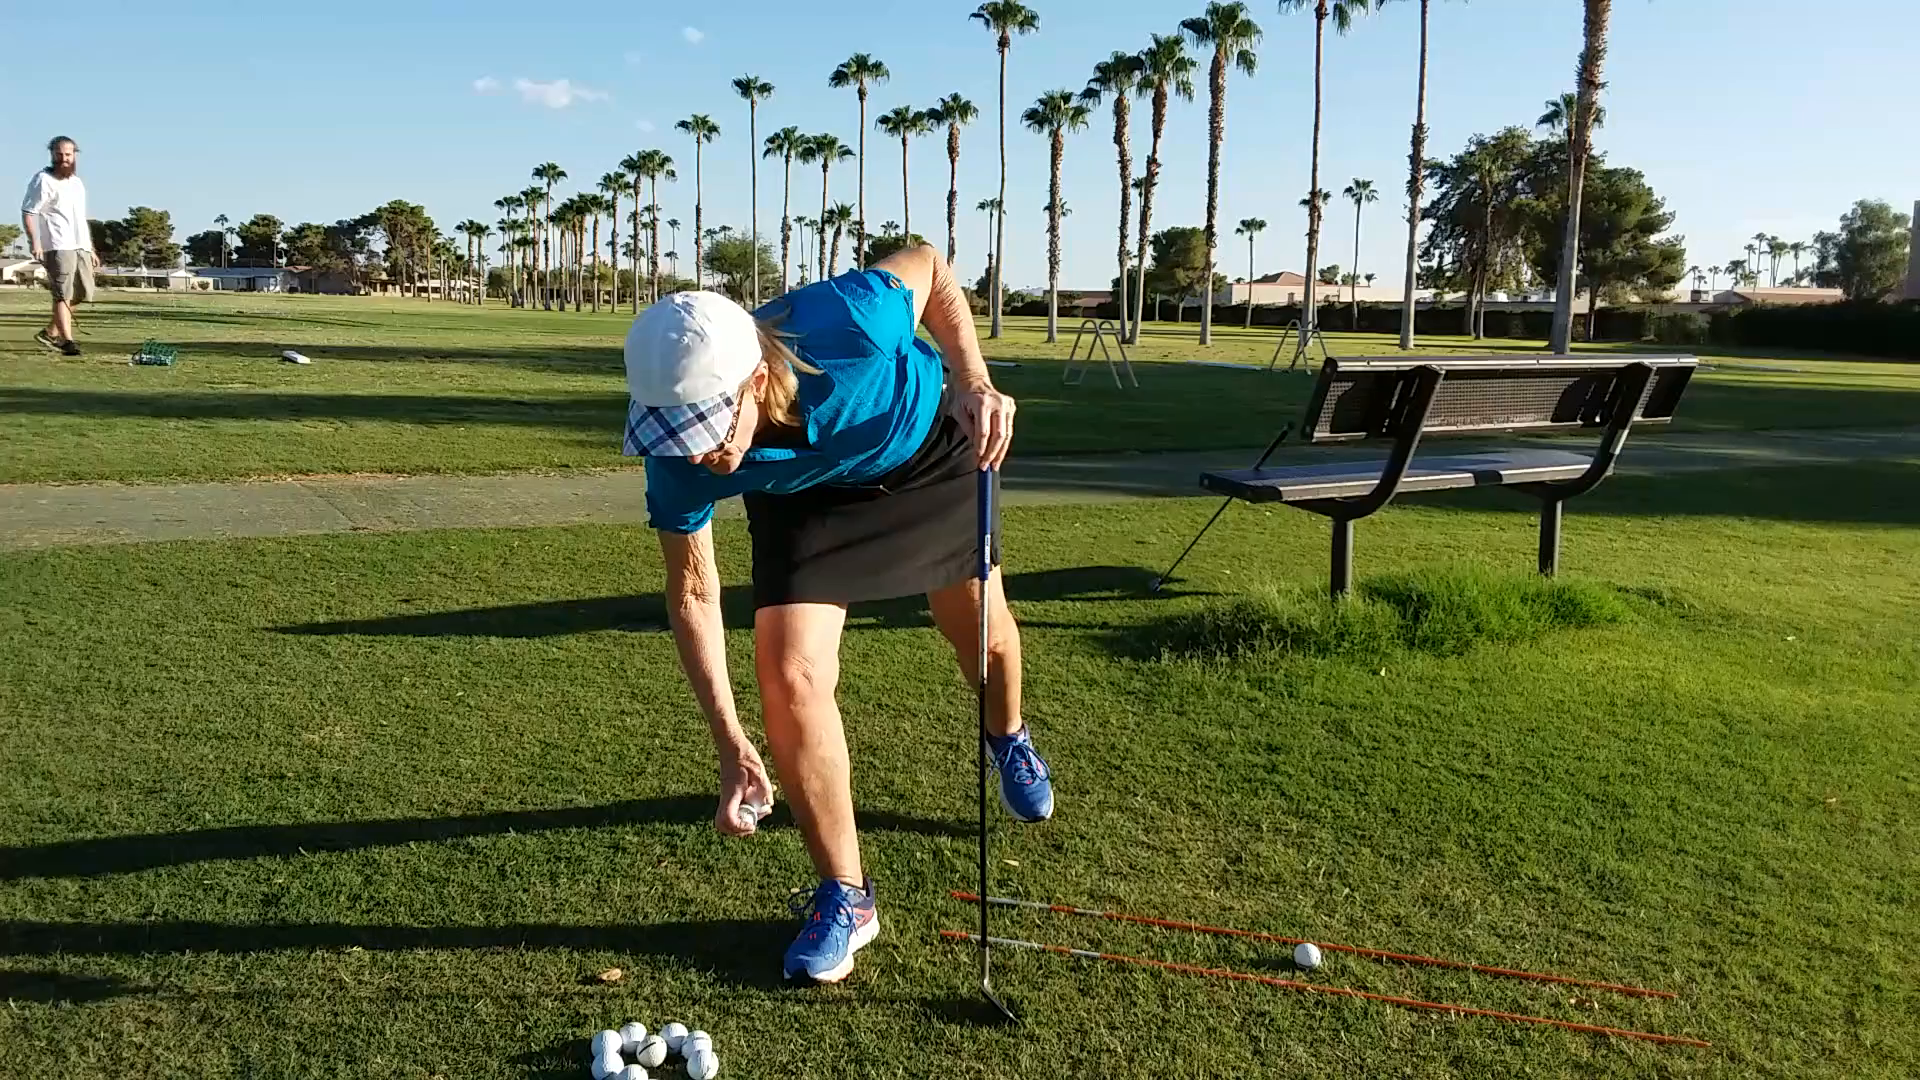 Coaches Guide Swing Fundamentals  - Chipping